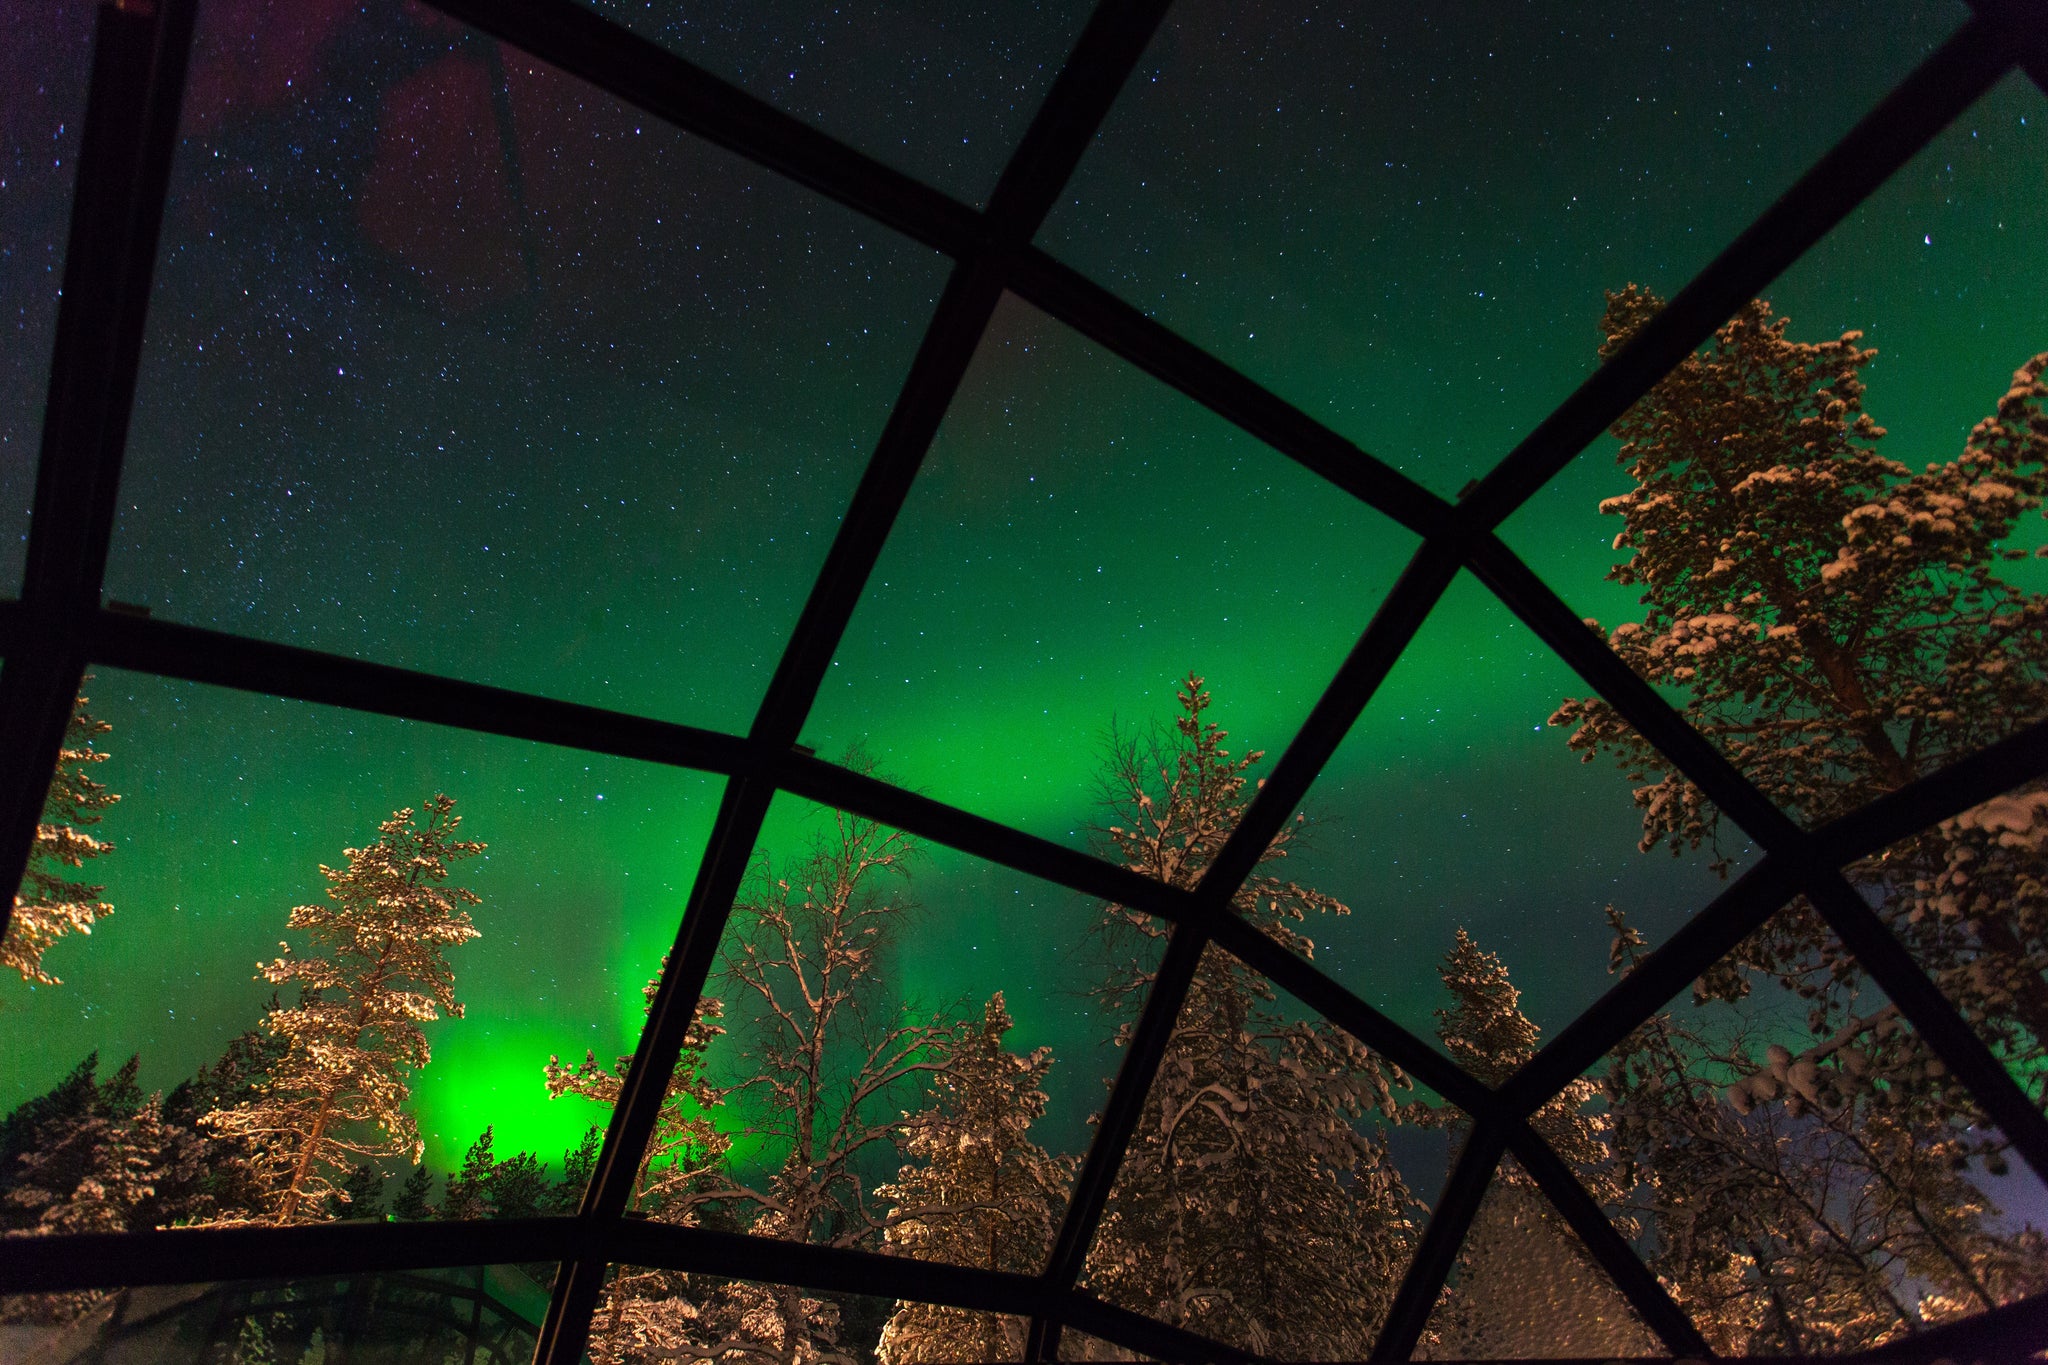 Northern Ligths from Glass Igloo at Kakslautten Artic Resort Finland